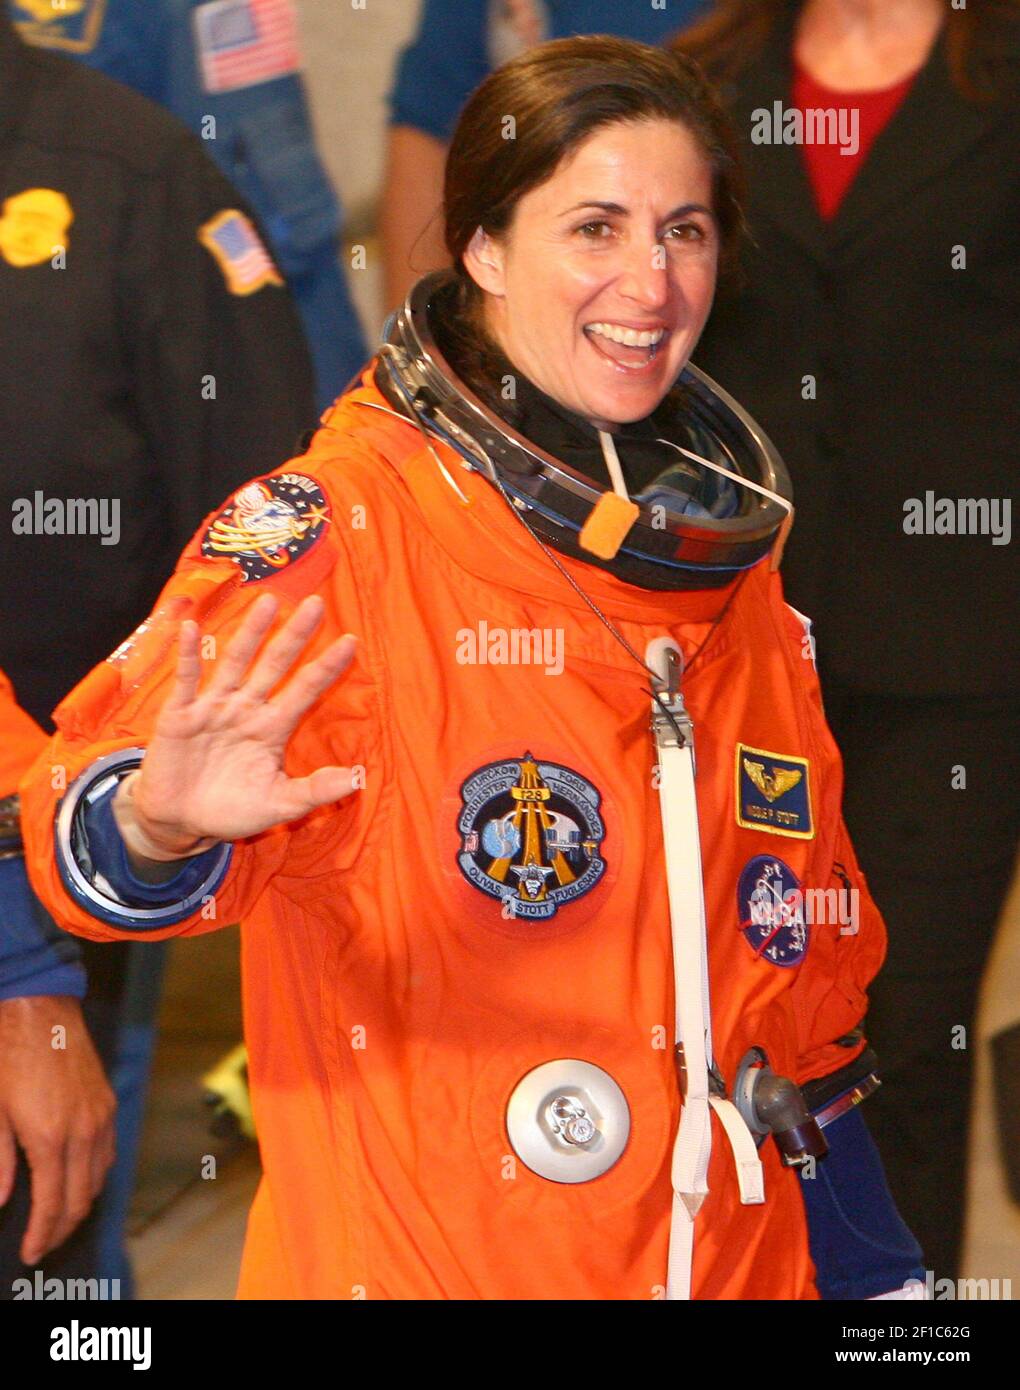 NASA astronaut Nicole Stott leaves the Operations and Checkout building, Monday, August 24, 2009, with six crew mates to board shuttle Discovery on launch pad 39A at the Kennedy Space Center, in Florida. Space shuttle Discovery is poised for launch for a supply mission to the International Space Station scheduled for 1:36 am EST Tuesday, August 25, 2009. (Photo by Red Huber/Orlando Sentinel/MCT/Sipa USA) Stock Photo